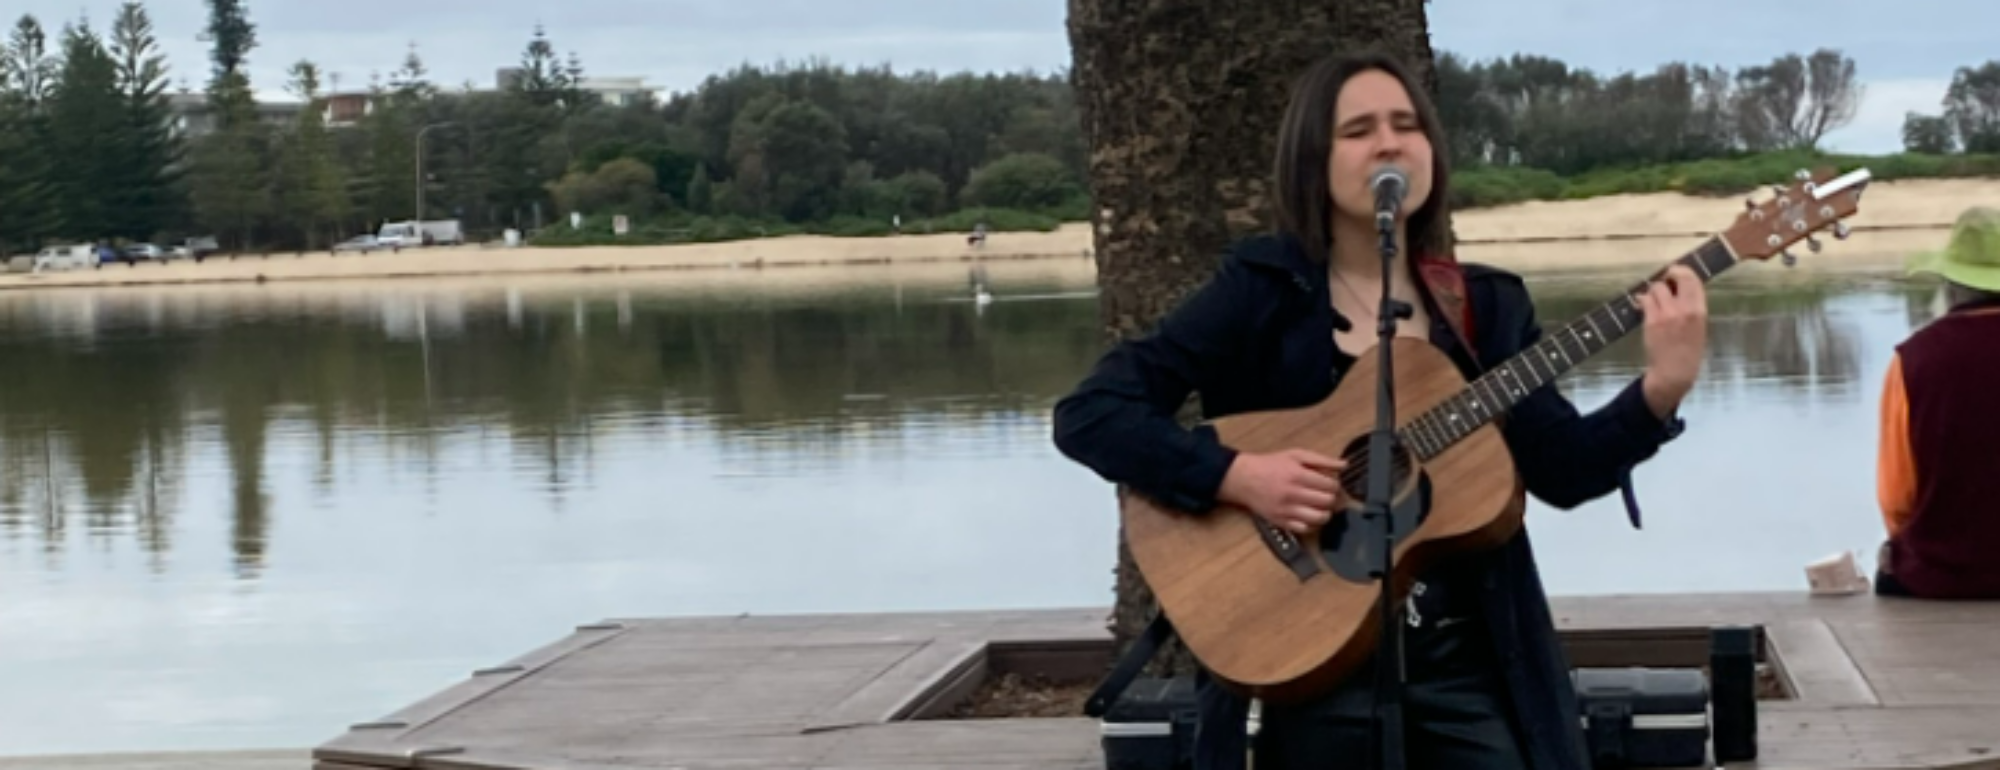 Talented Eve Pagacova soars to second place at busking championships